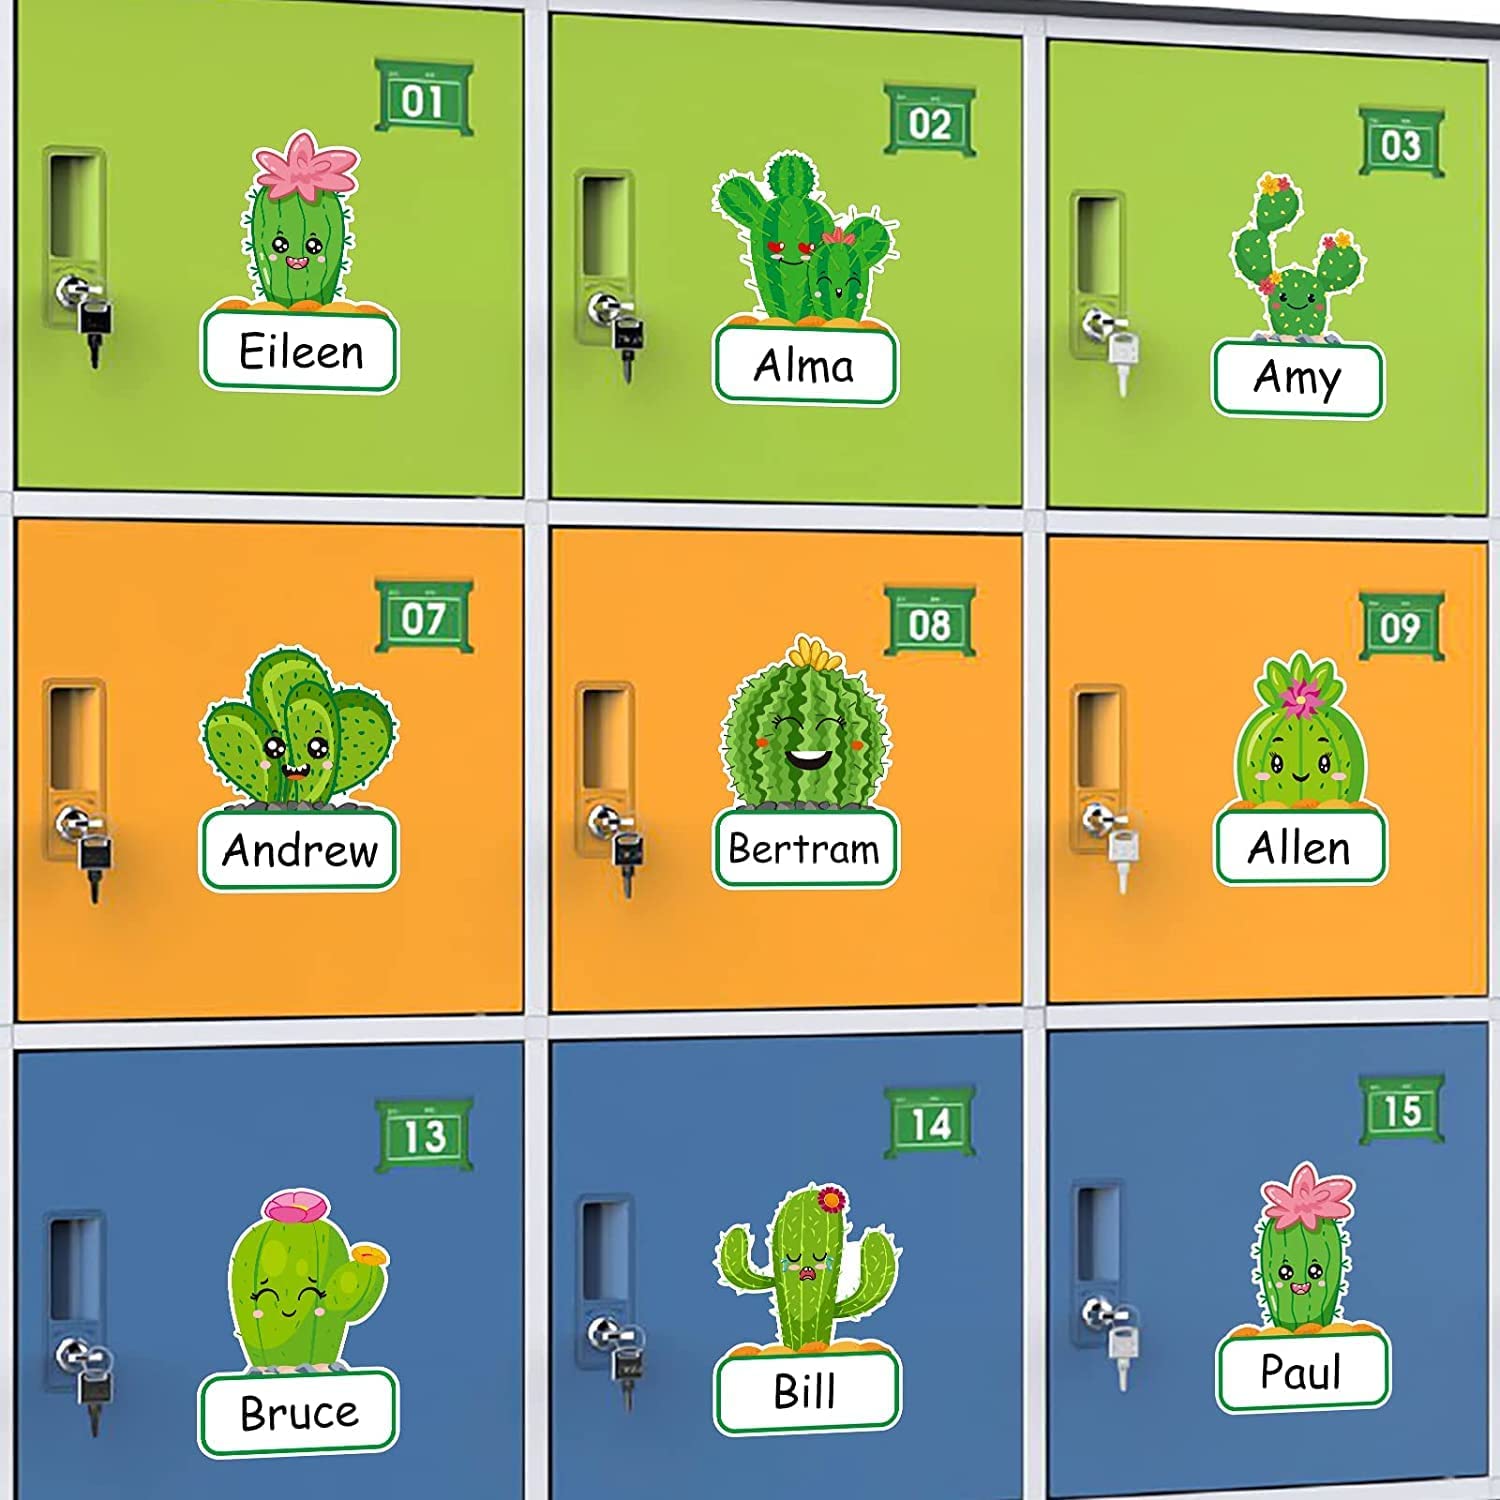 Name Tag A set of stickers with a cactus design